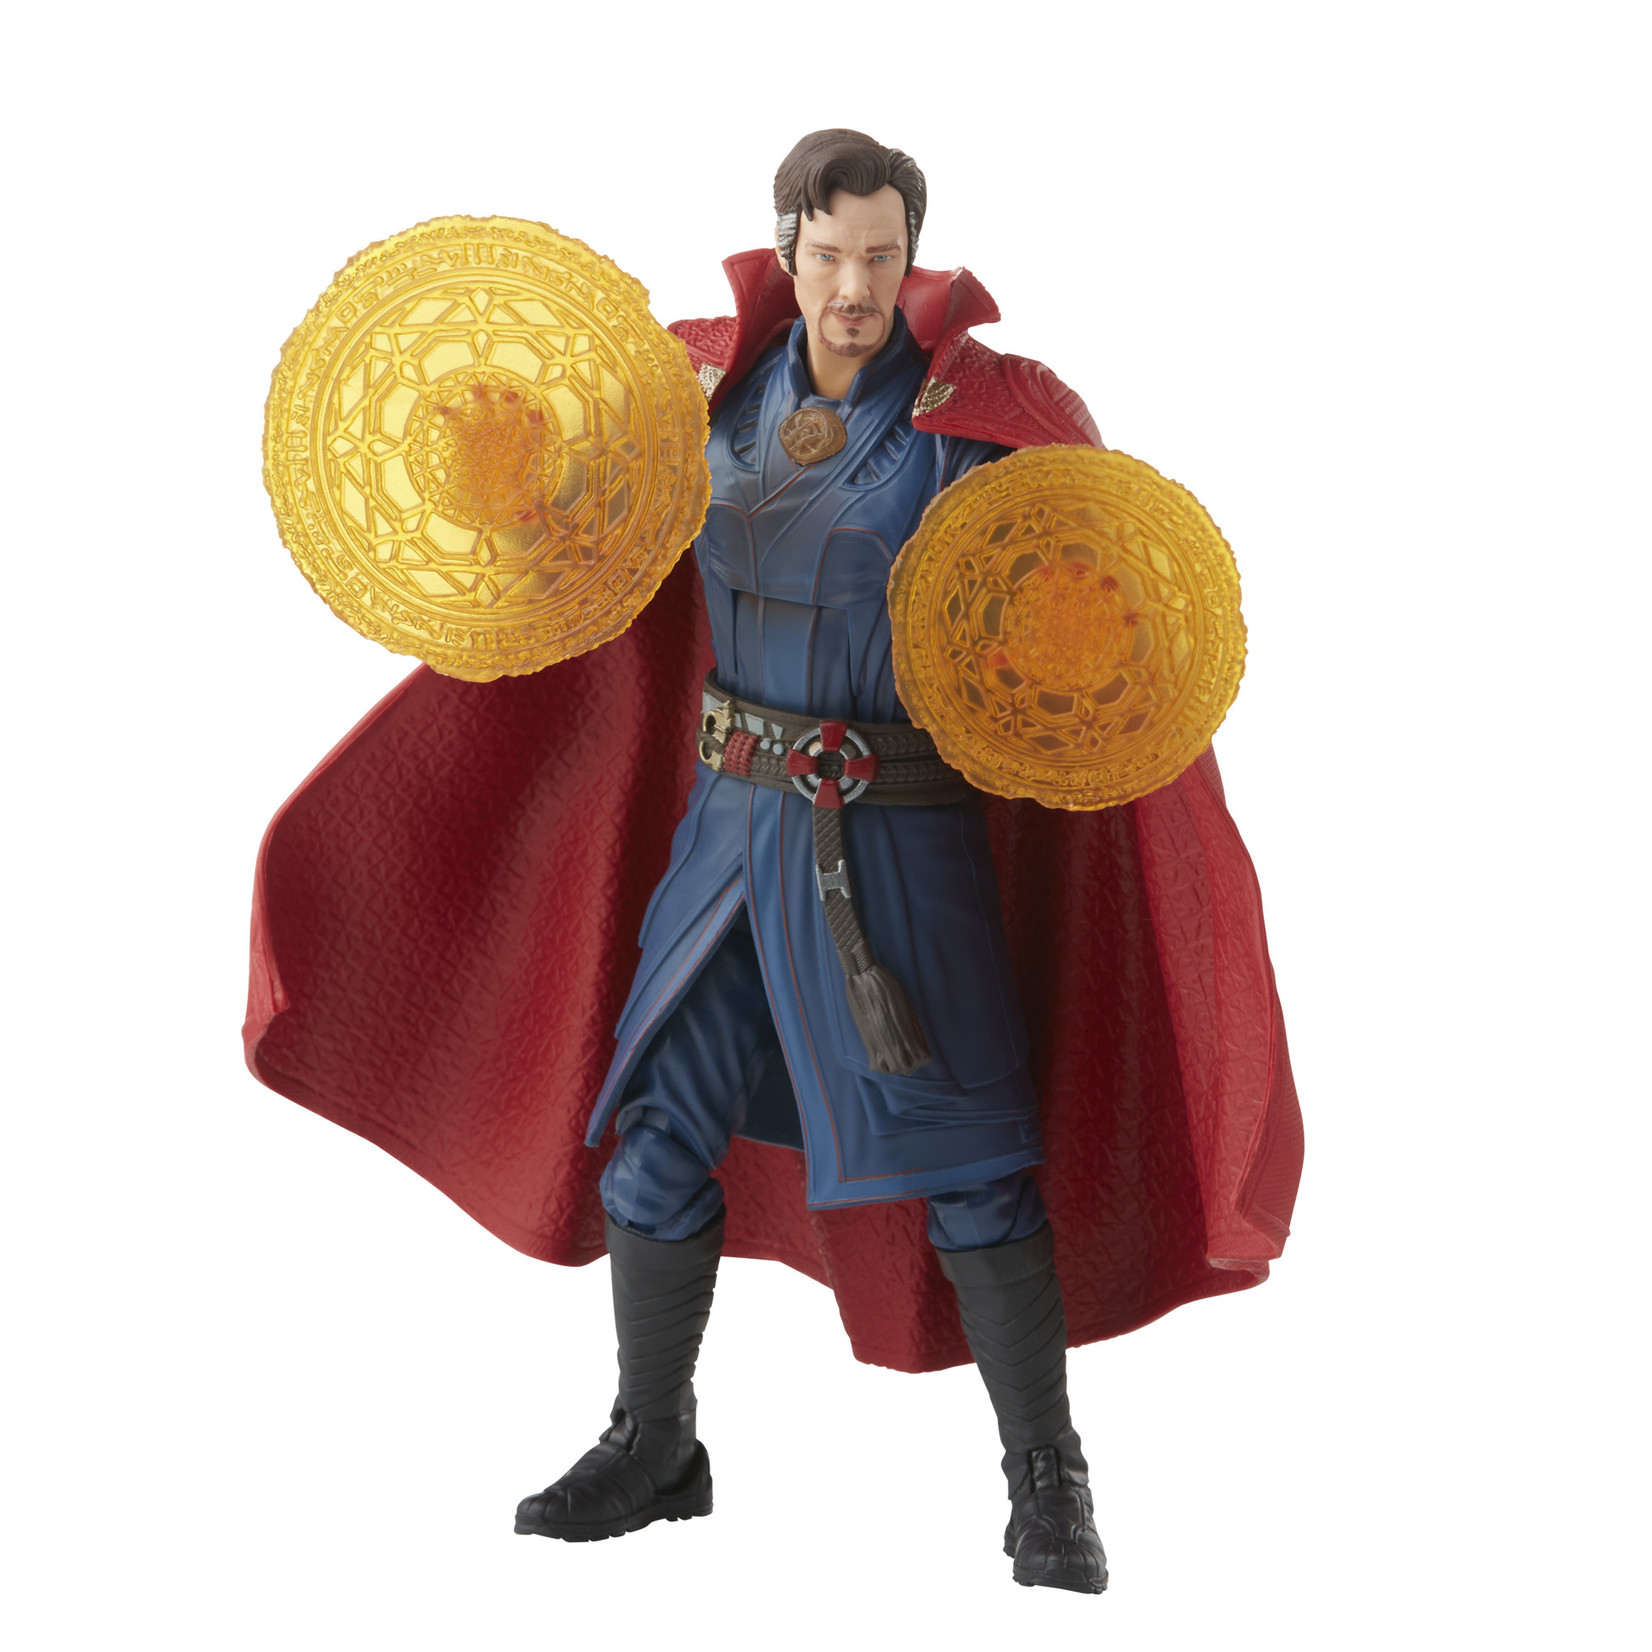 Hasbro MARVEL LEGENDS SERIES DOCTOR STRANGE IN THE MULTIVERSE OF MADNESS 6-INCH COLLECTIBLE DOCTOR STRANGE ACTION FIGURE